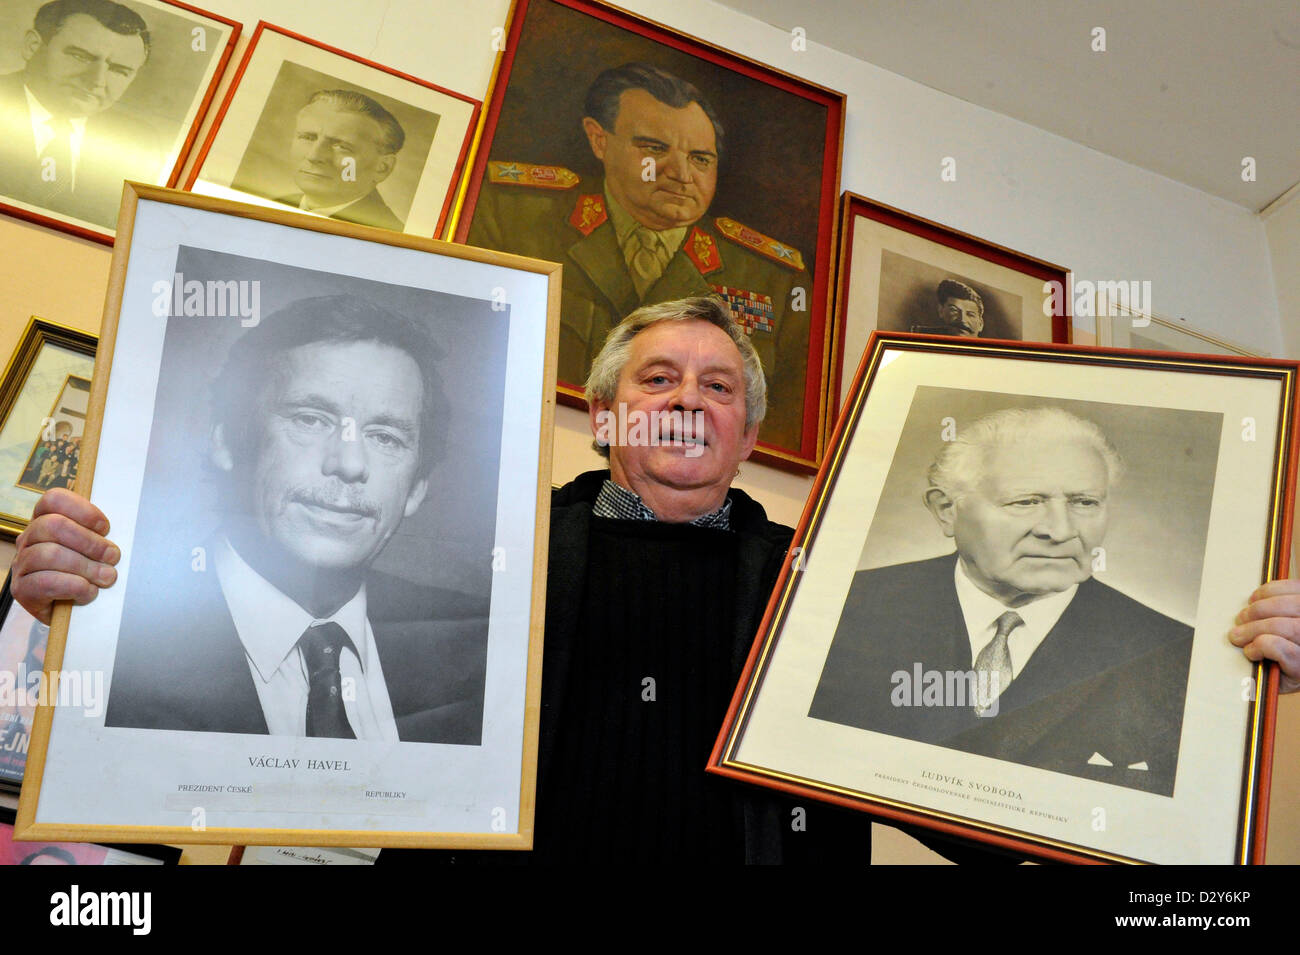 Glazier Dalibor Zabka shows official presidential portraits from his collection in Blansko, Czech Republic on February 4, 2013. Dalibor Zabka is an entusiastic collector of the official portraits of the Czechoslovak and later Czech presidents which were shown in officies and schools. (CTK Photo/Vaclav Salek) Stock Photo